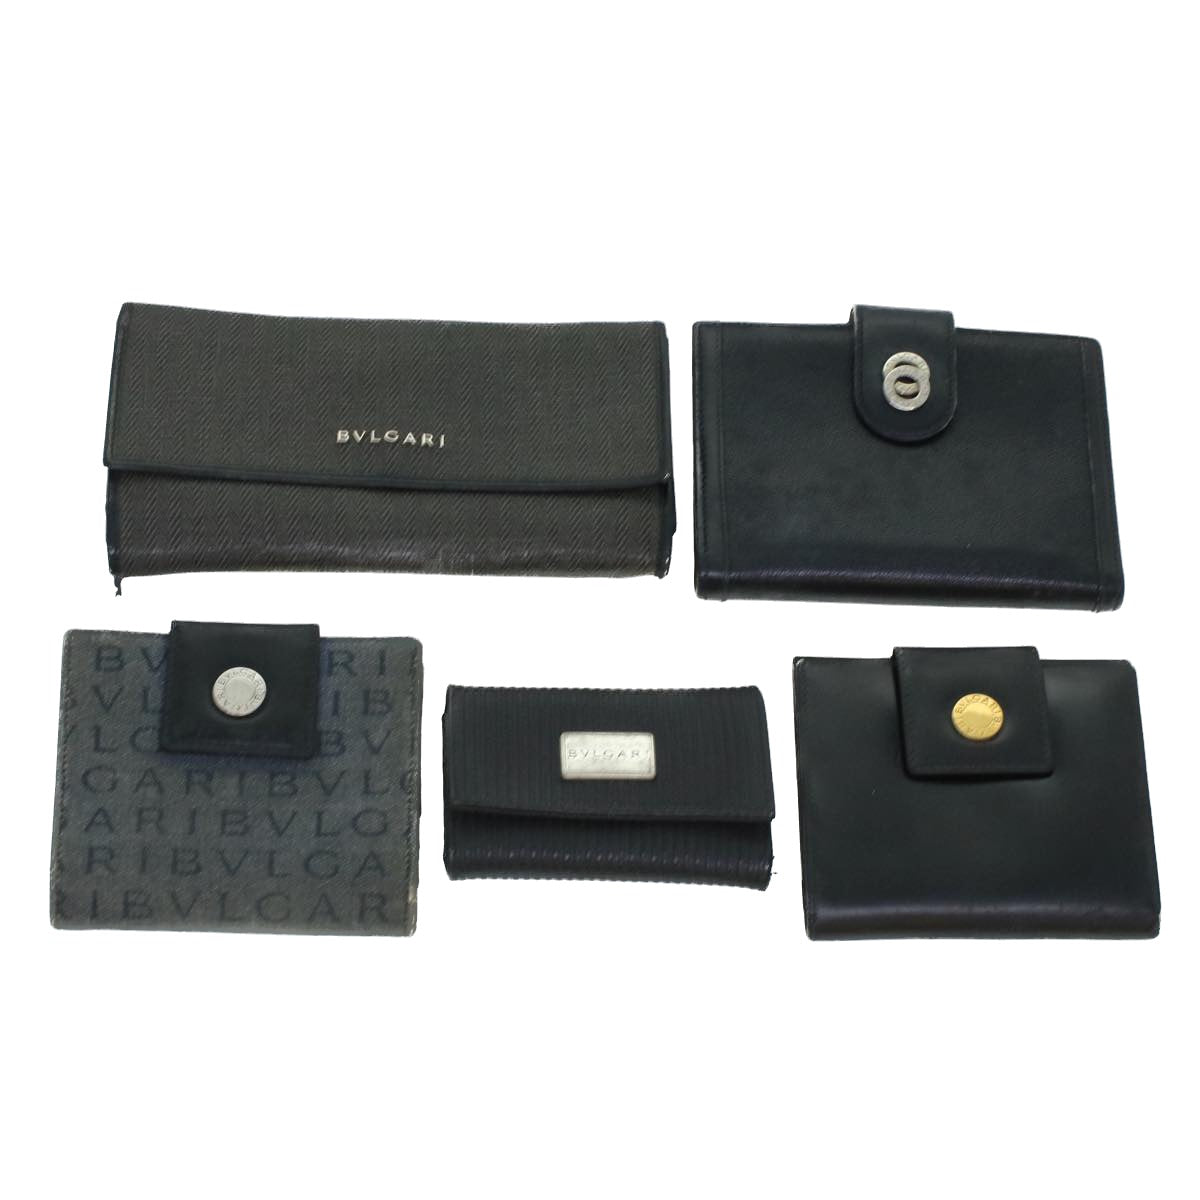 BVLGARI Wallet Day Planner Cover Canvas Leather 5Set Black Gray Auth 44071